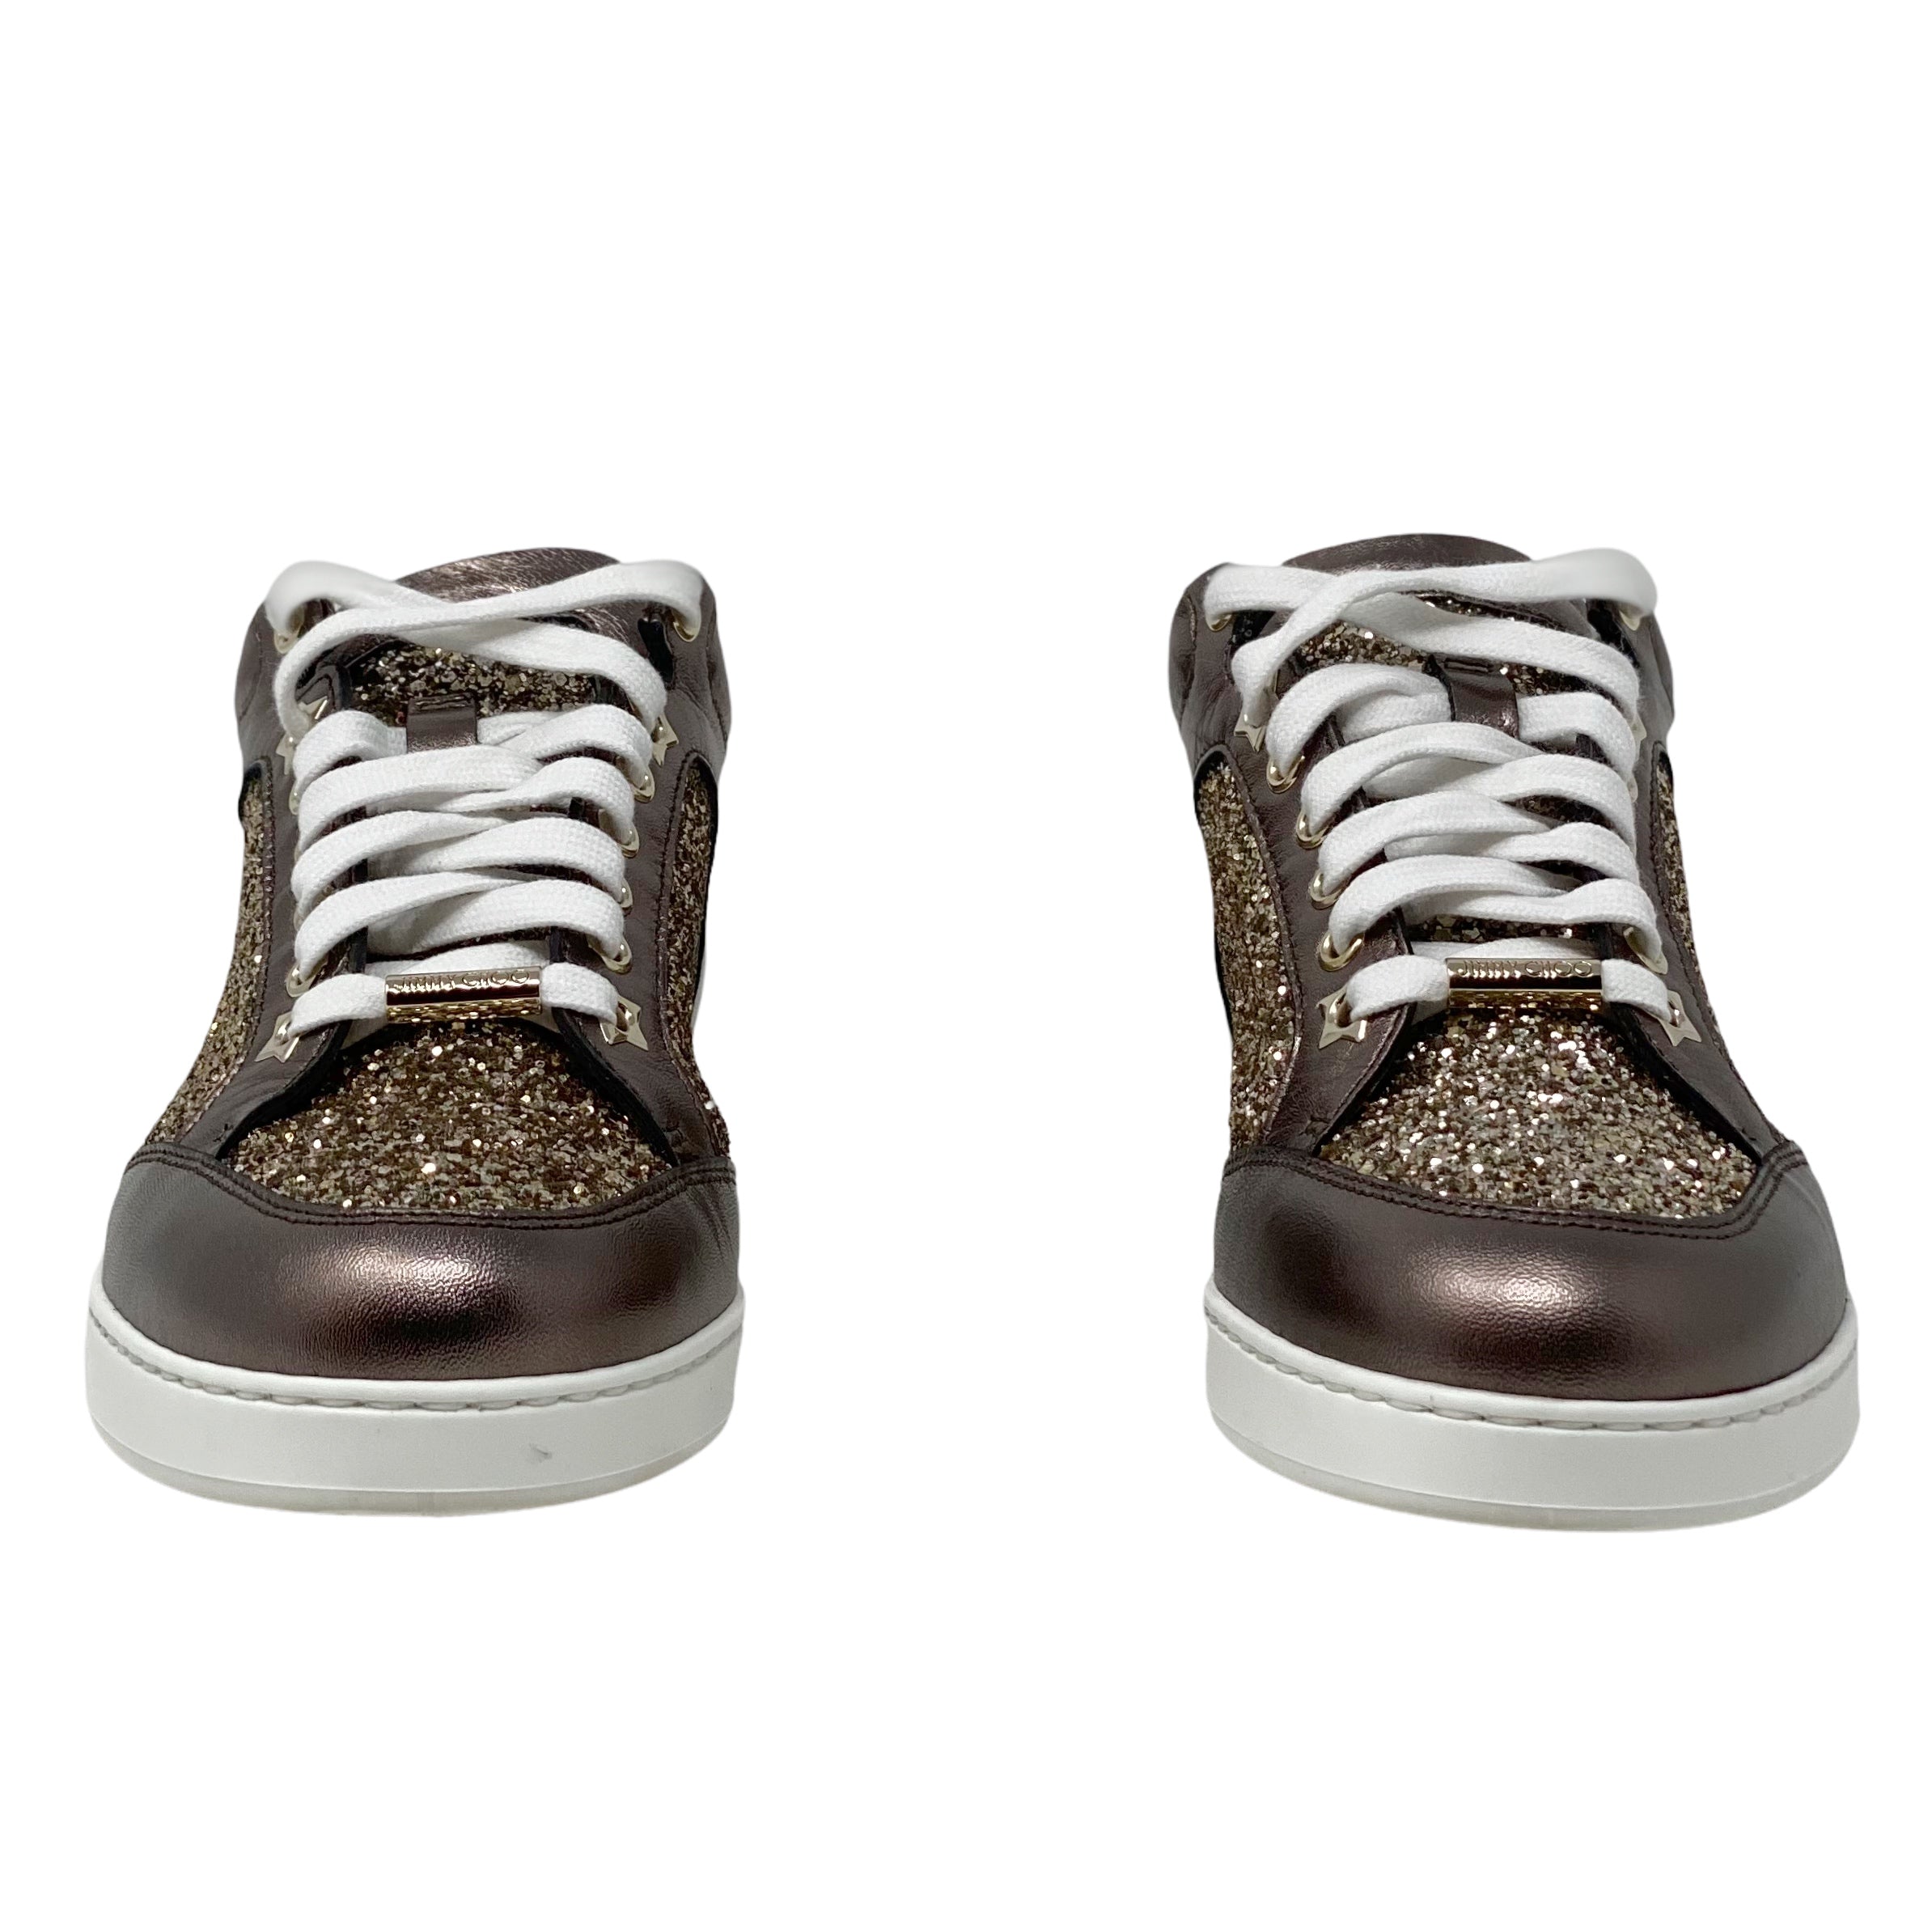 Jimmy Choo Antique Gold Glitter Miami Sneakers 37